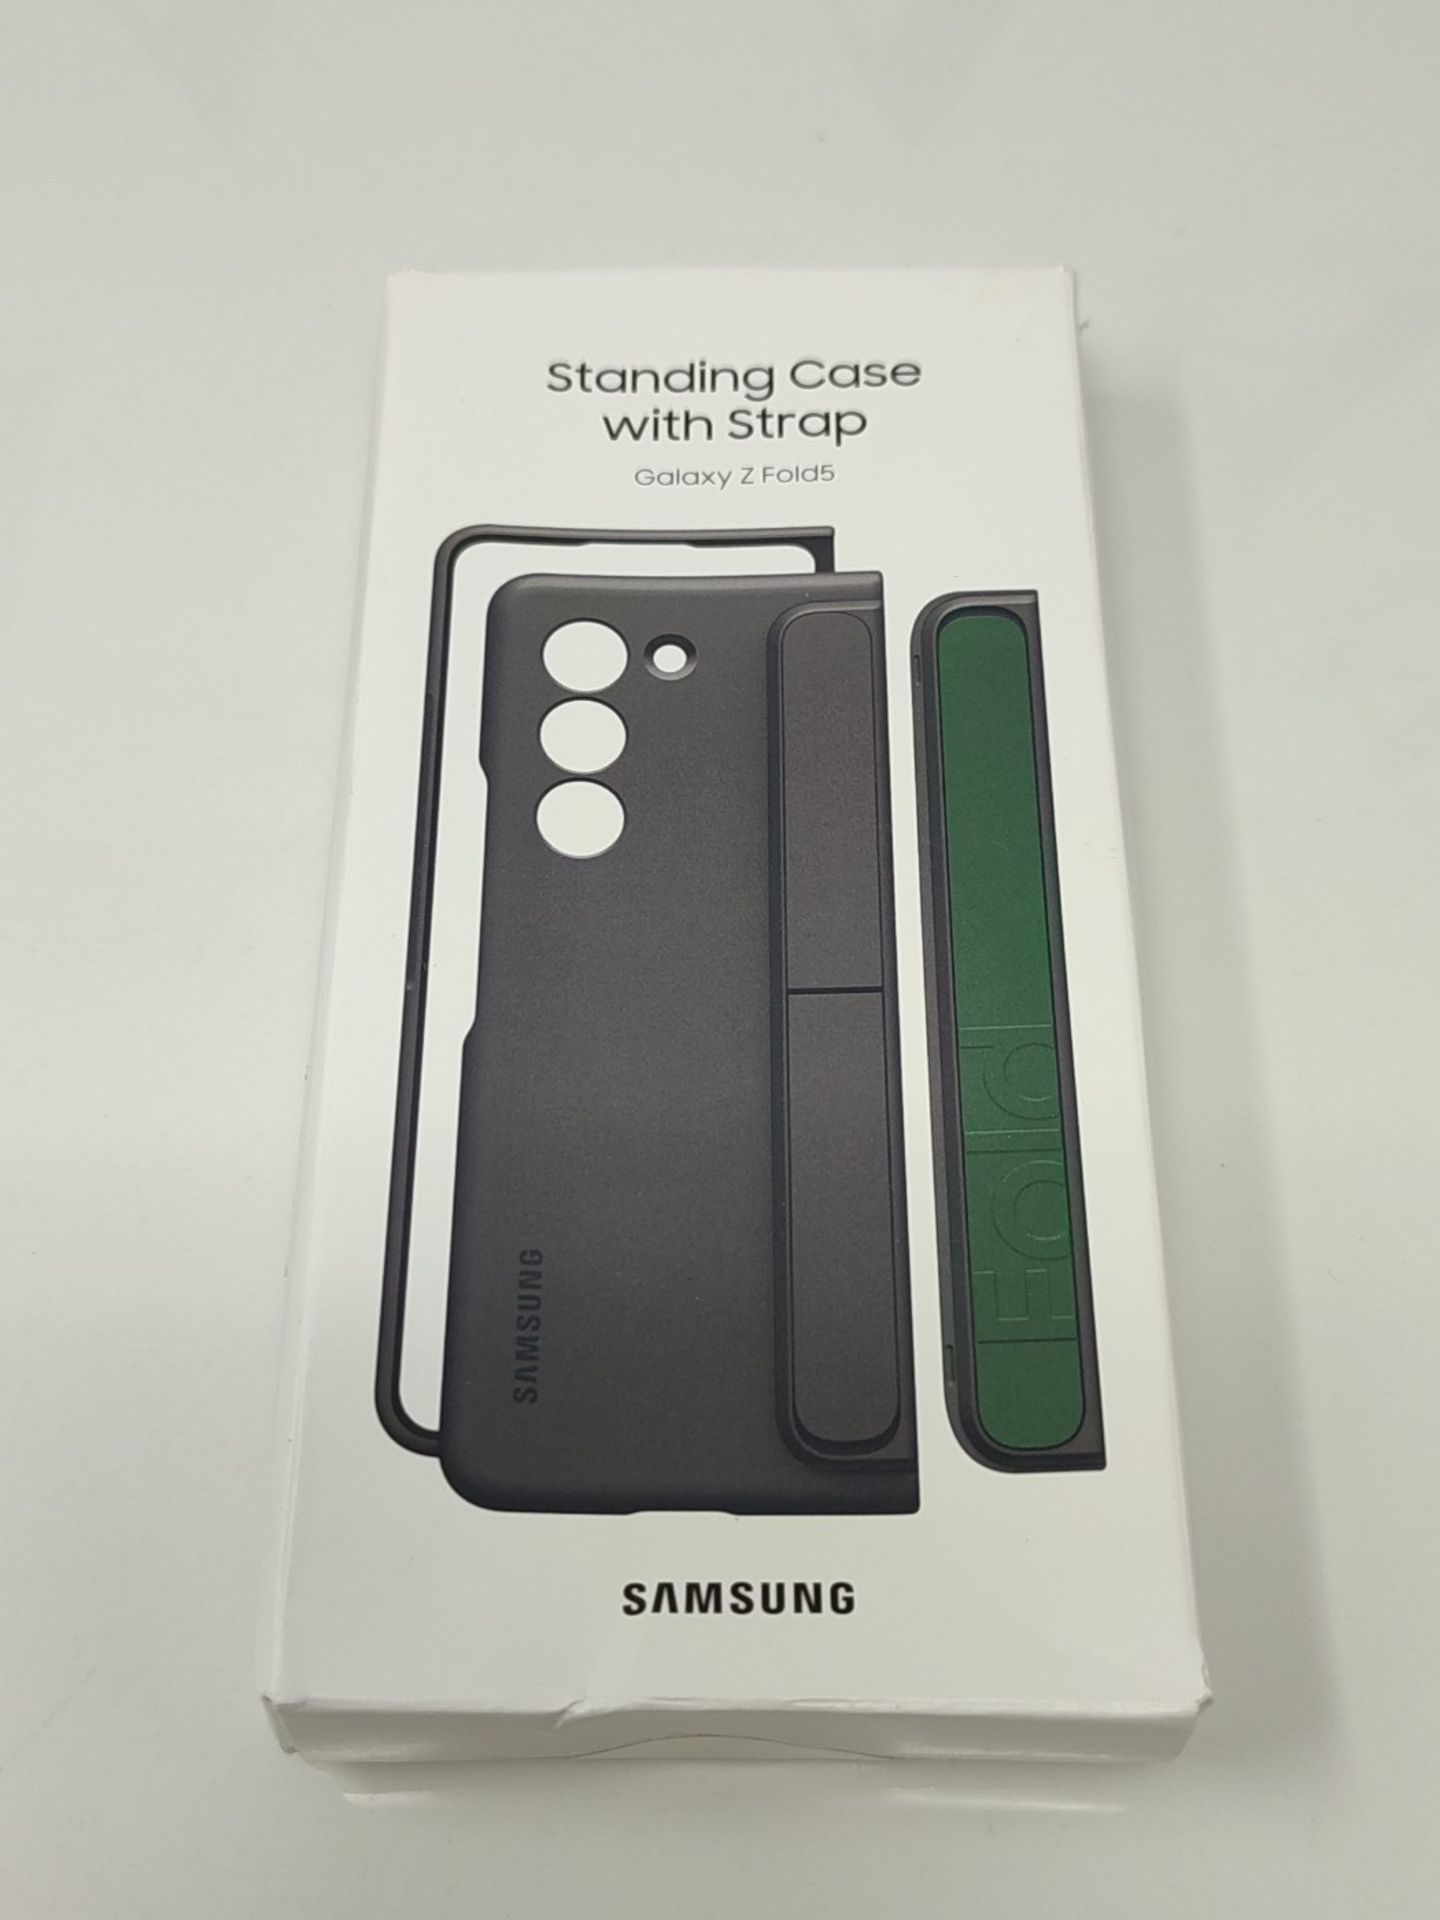 Samsung Galaxy Official Standing Case with Strap for Z Fold5, Graphite - Image 2 of 3